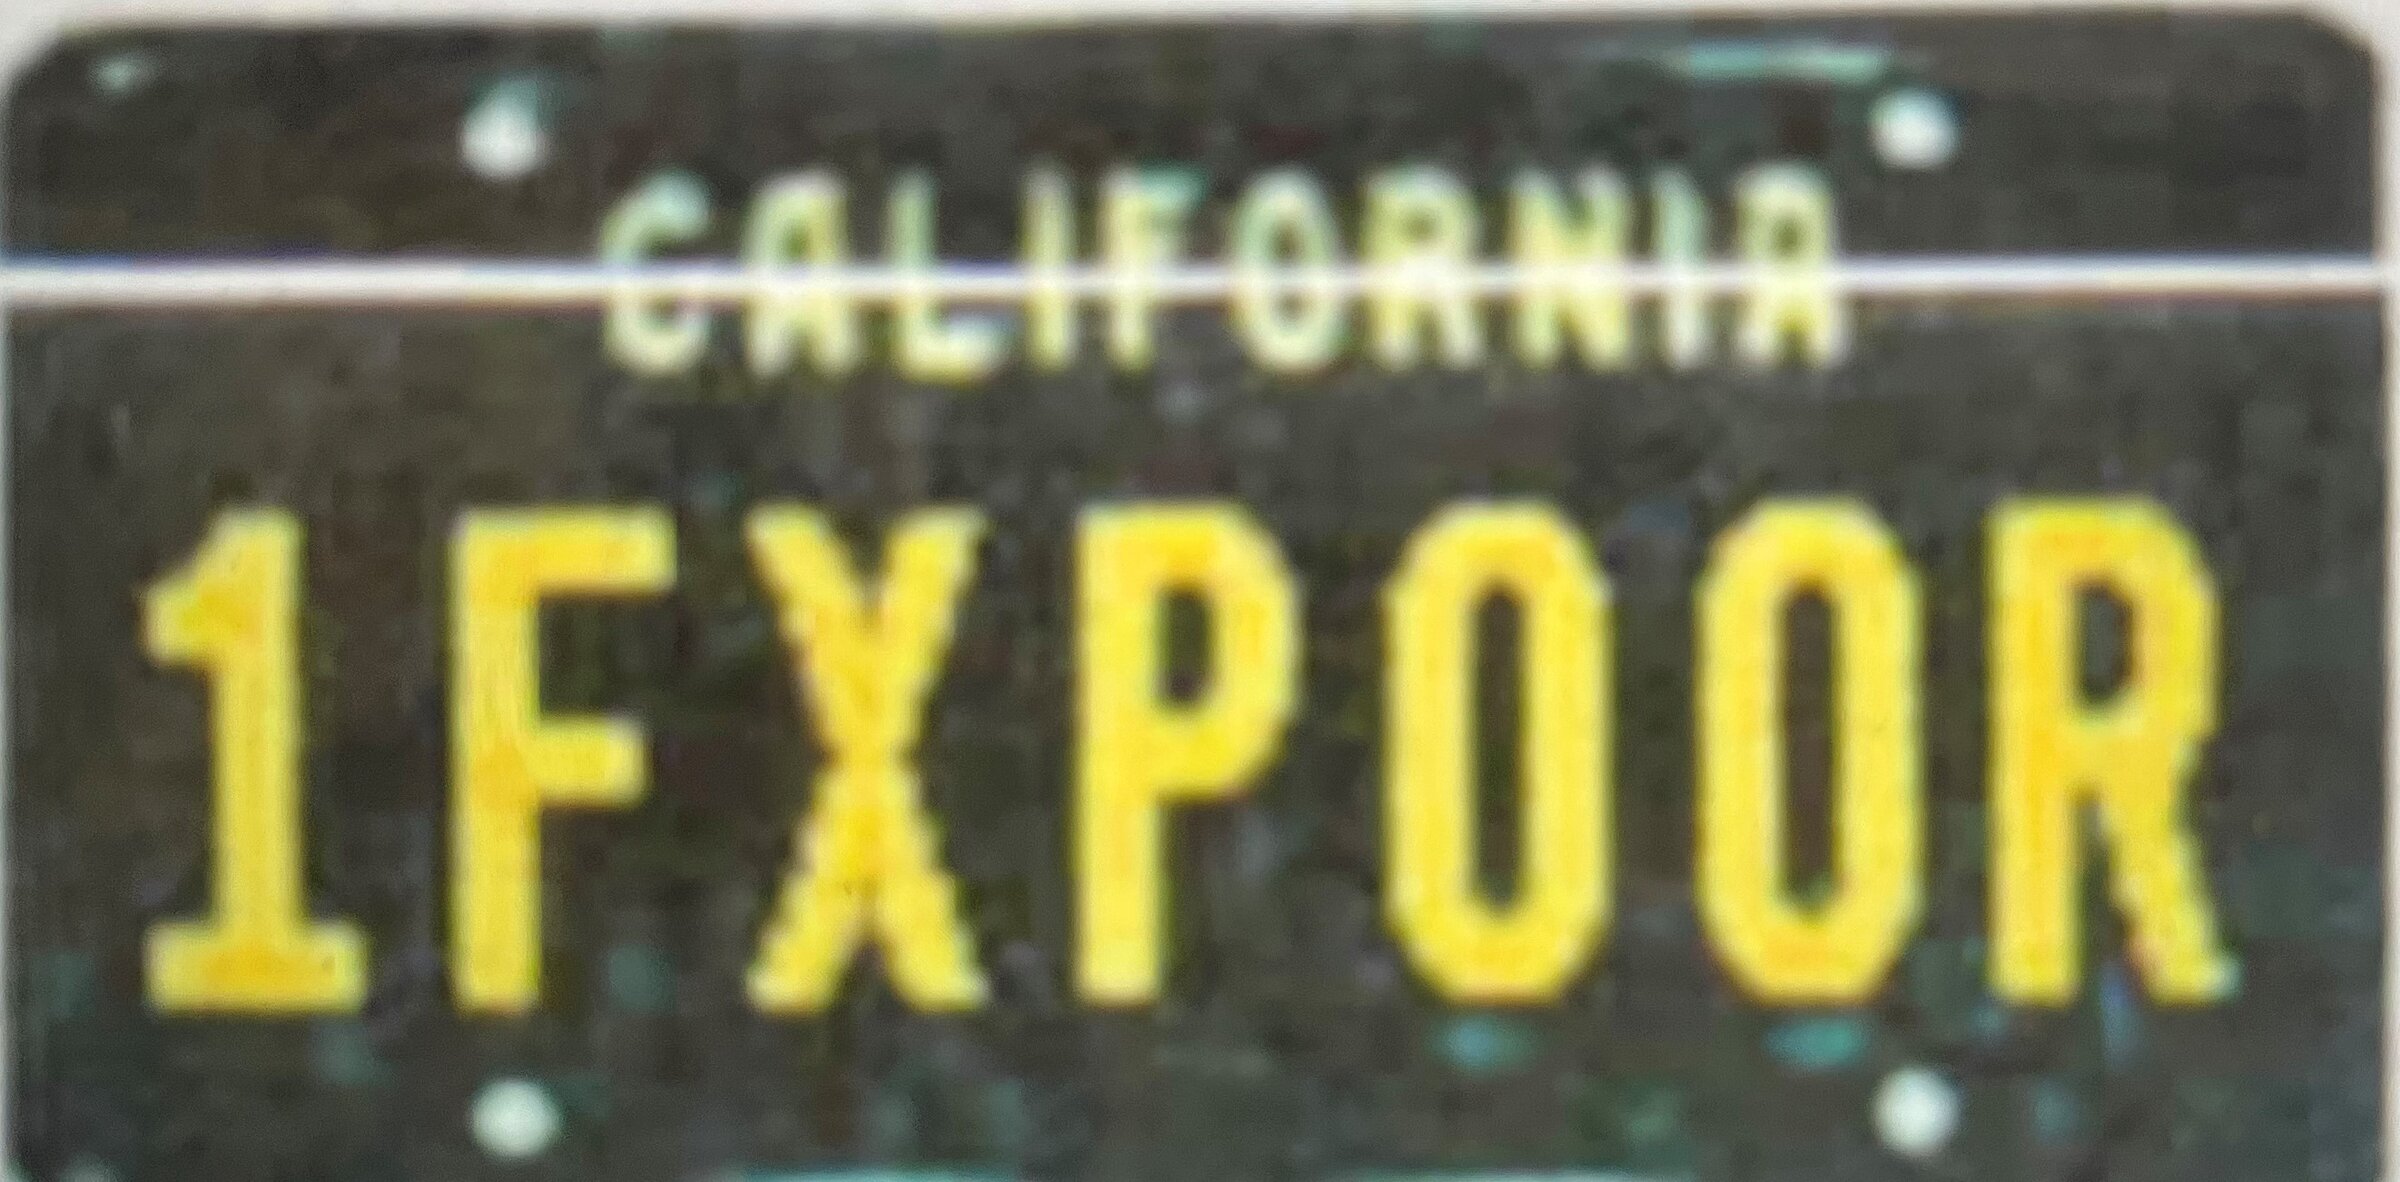 Ford Maverick Loved the name "FX POOR" so I ordered the personalized license plate!🤣 IMG-0358